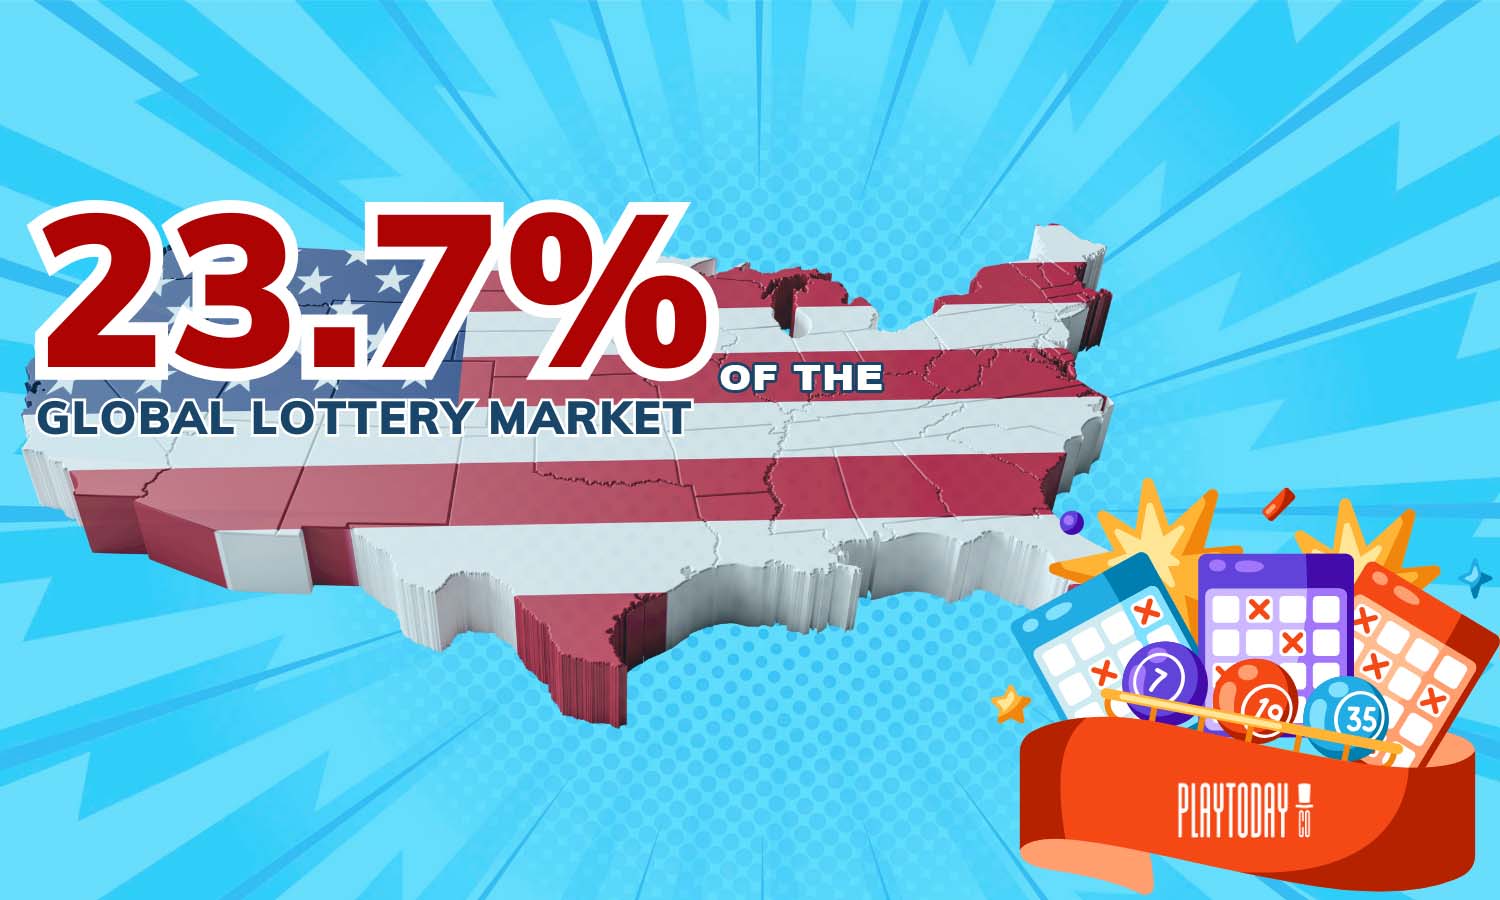 An infographic showing the US holds 23.7% of the global Lottery market